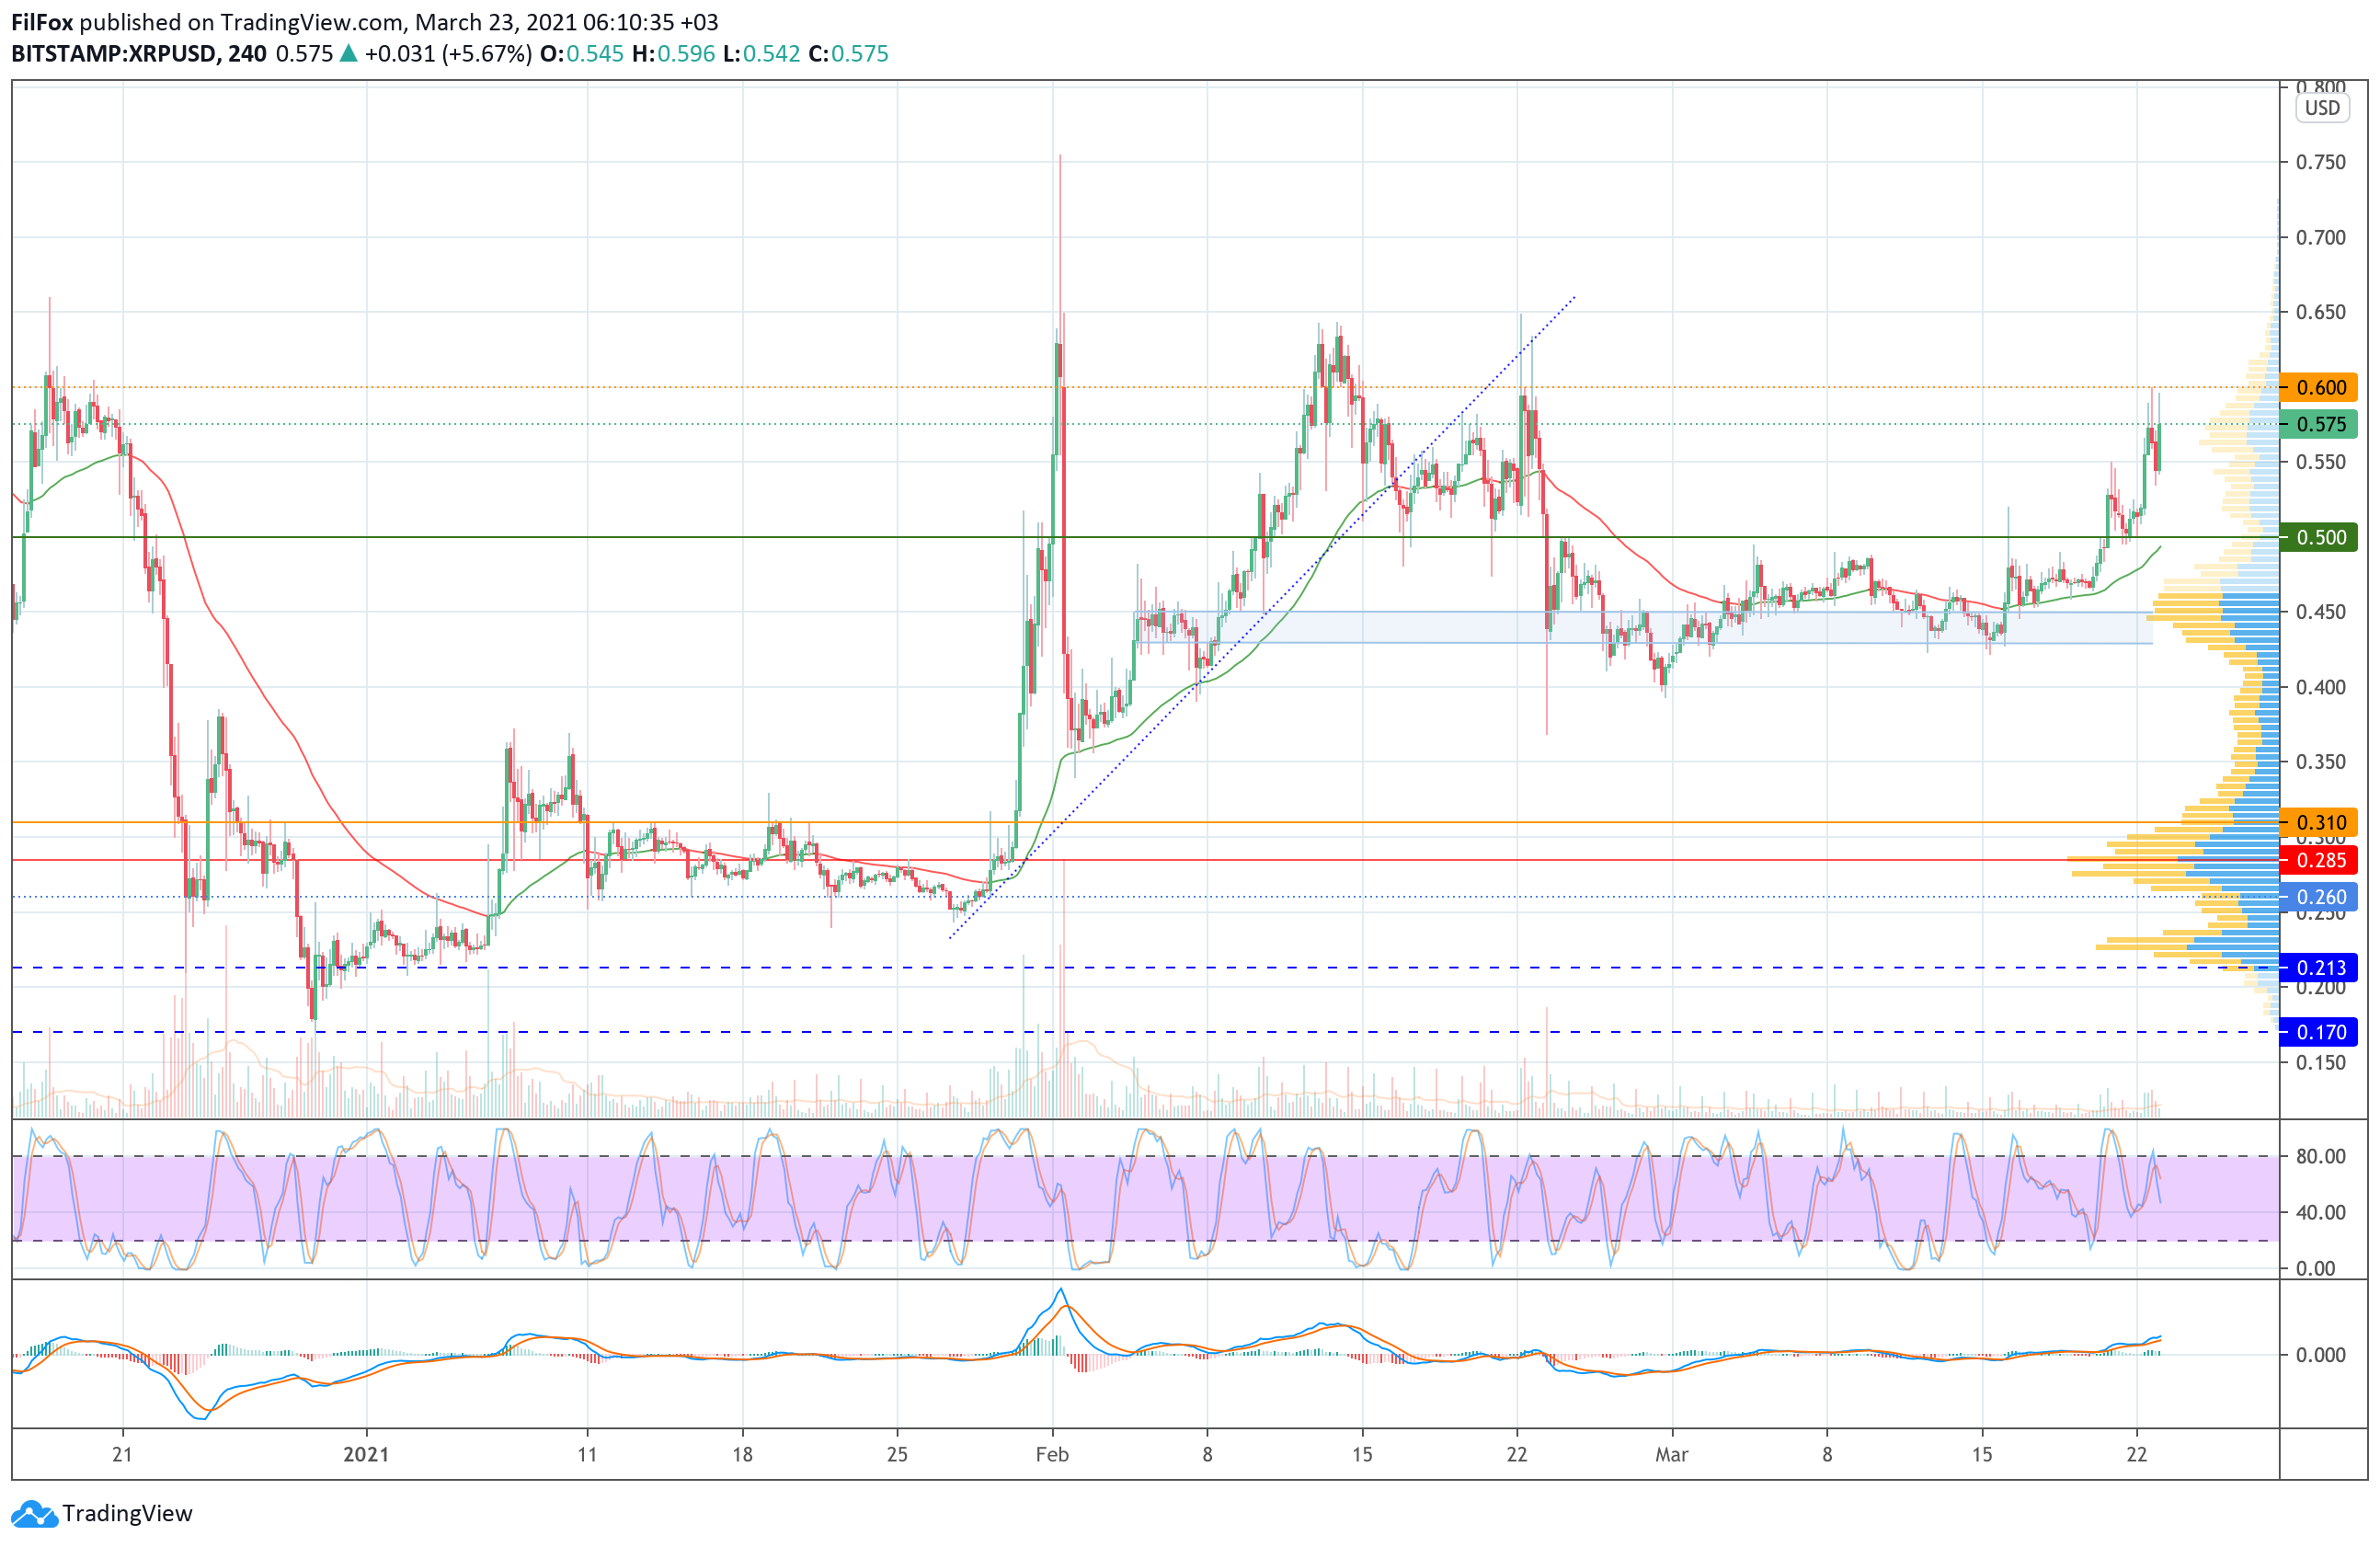 Analysis of the prices of Bitcoin, Ethereum, XRP for 03/23/2021